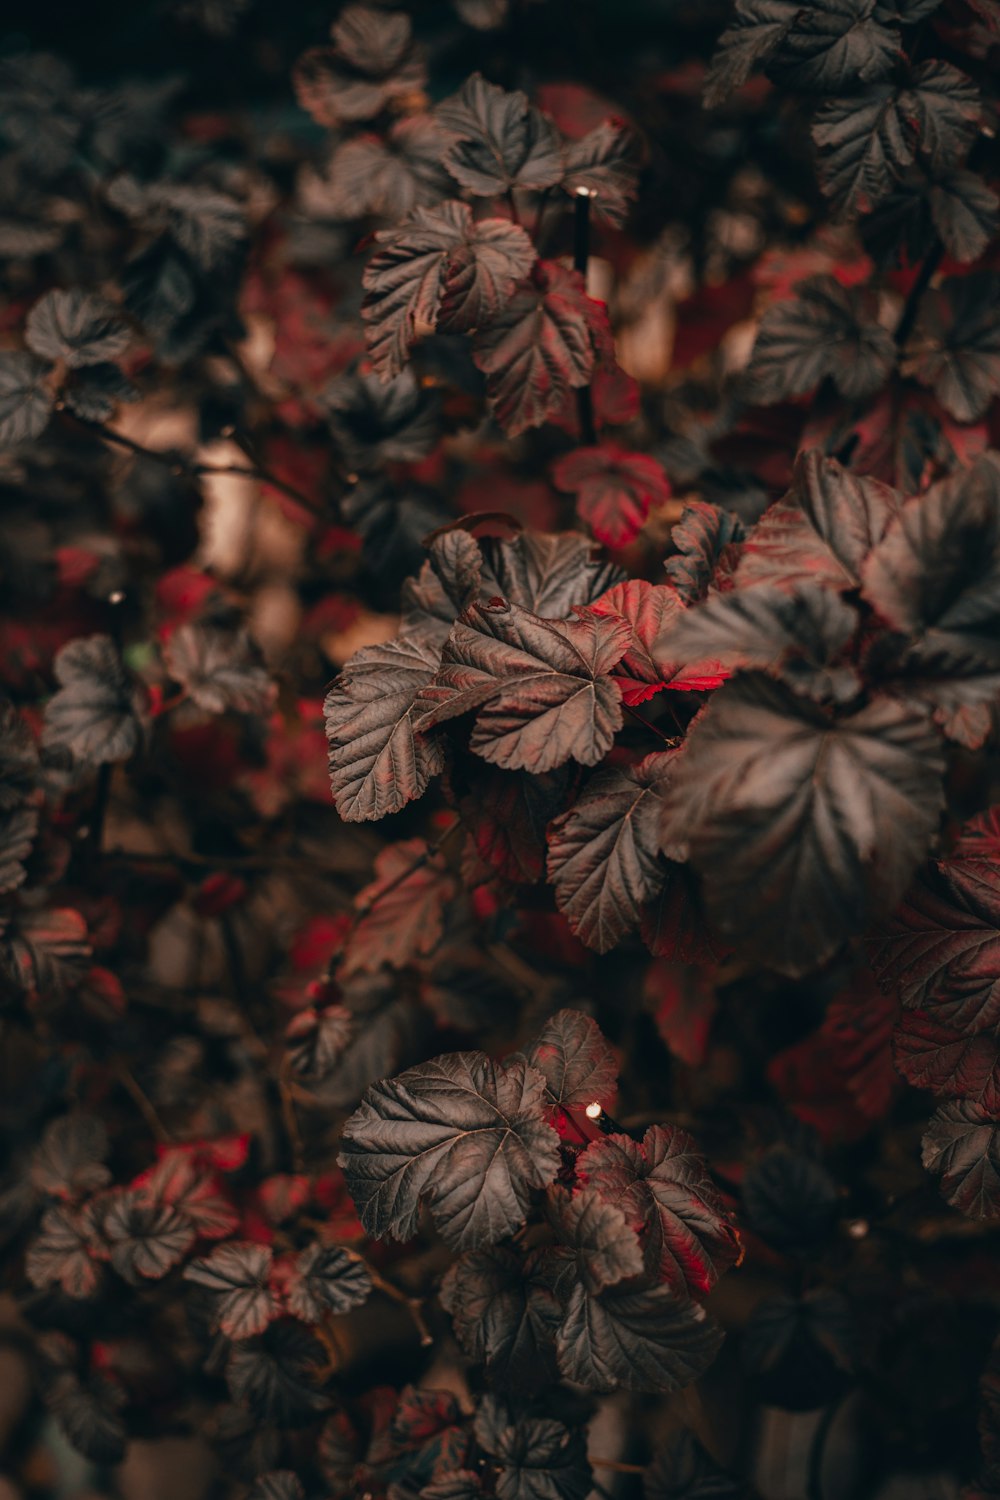 a group of red leaves